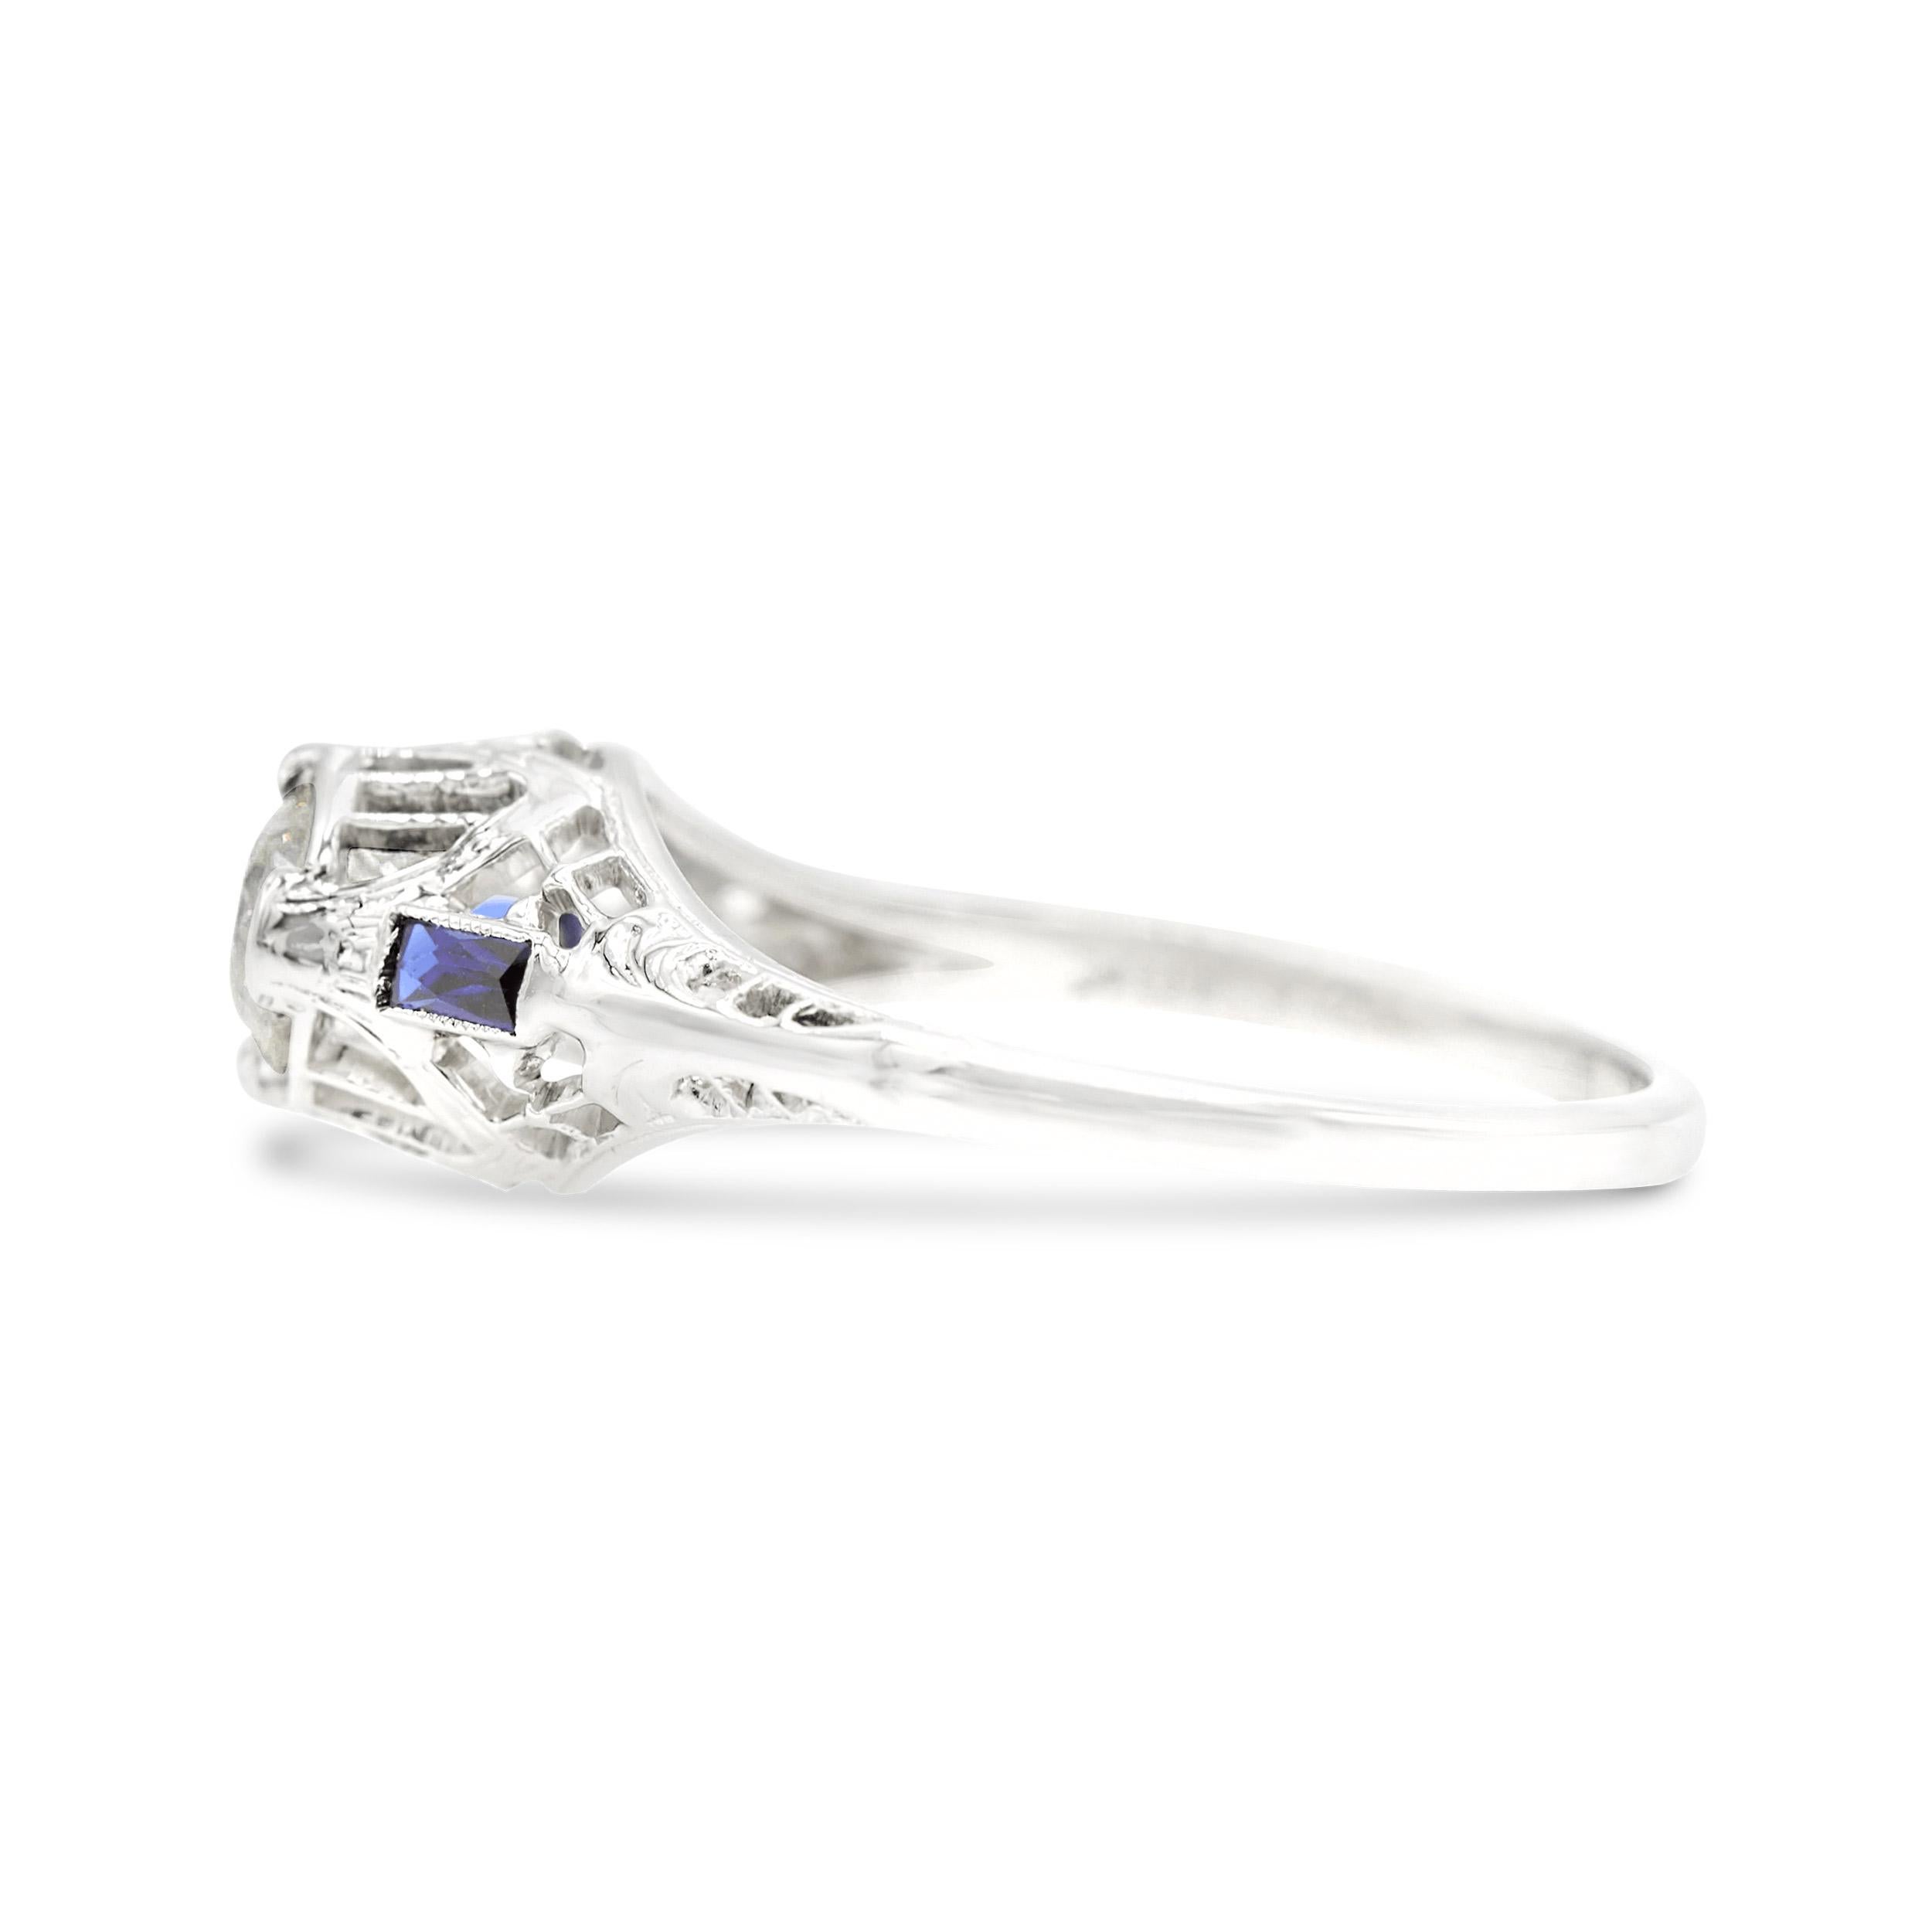 Old European Cut Art Deco GIA Certified 0.50 Ct. Diamond and Sapphire Engagement Ring H VS1 For Sale